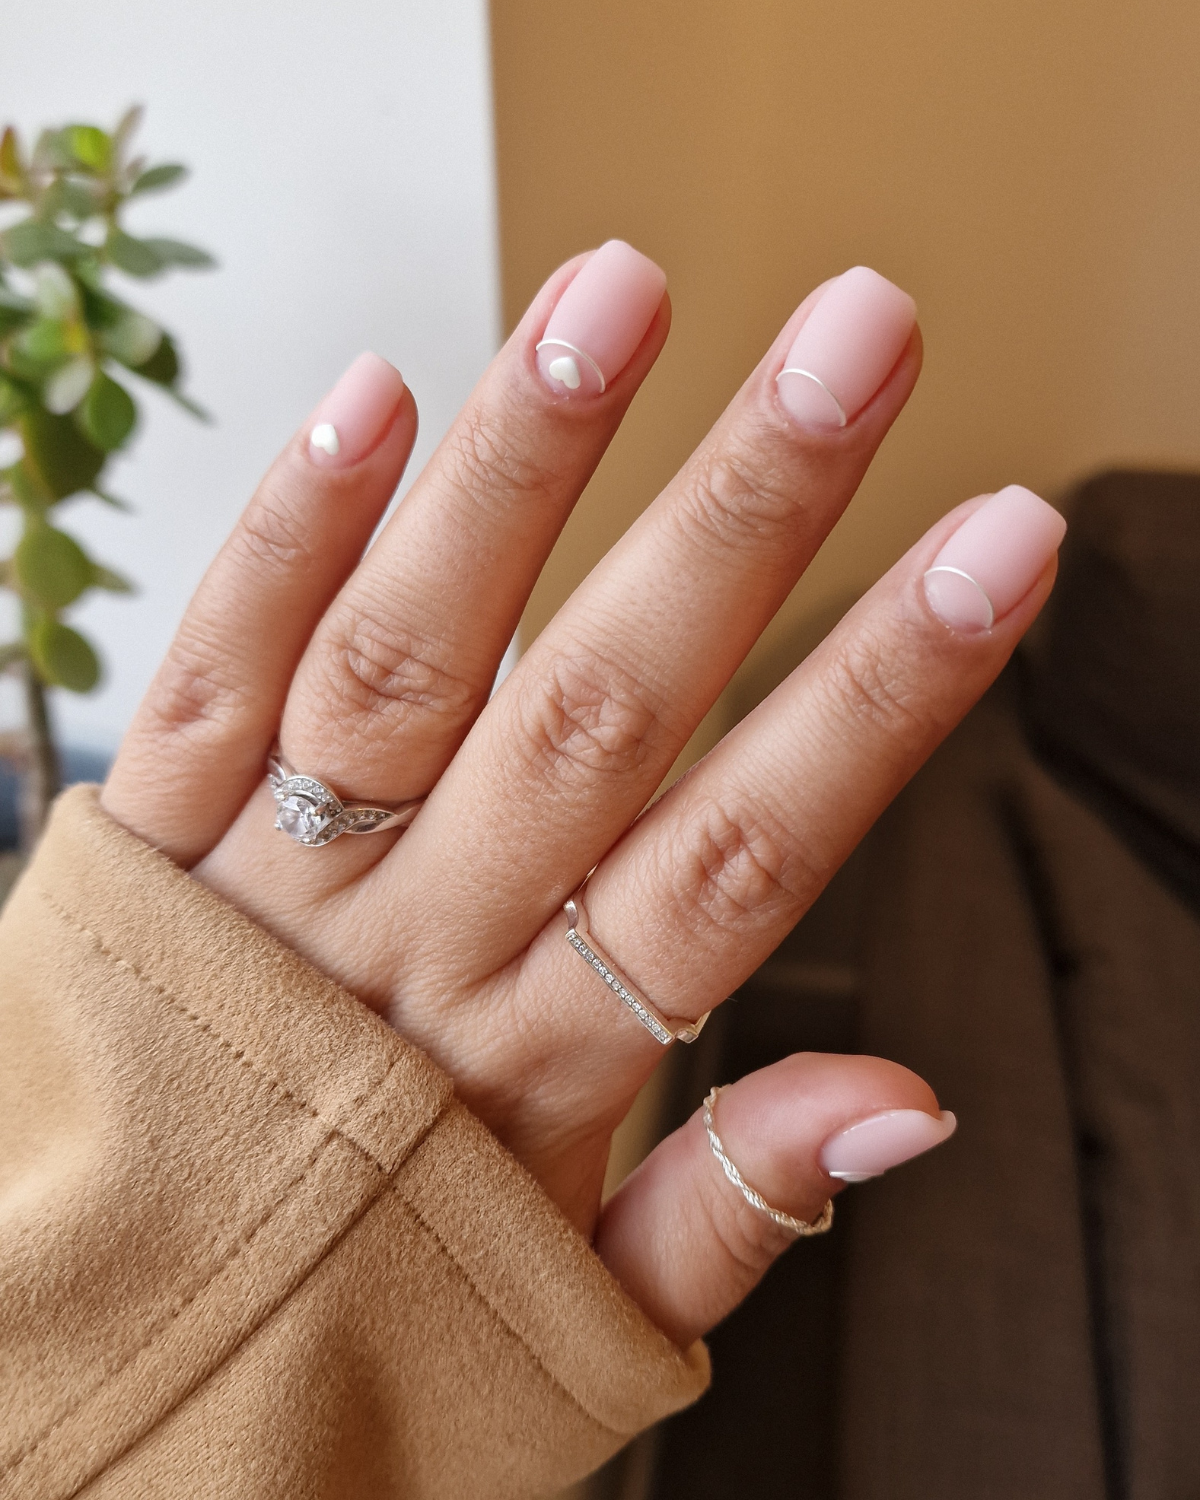 12 Popular Nail Shapes for Your Next Manicure - StyleSeat